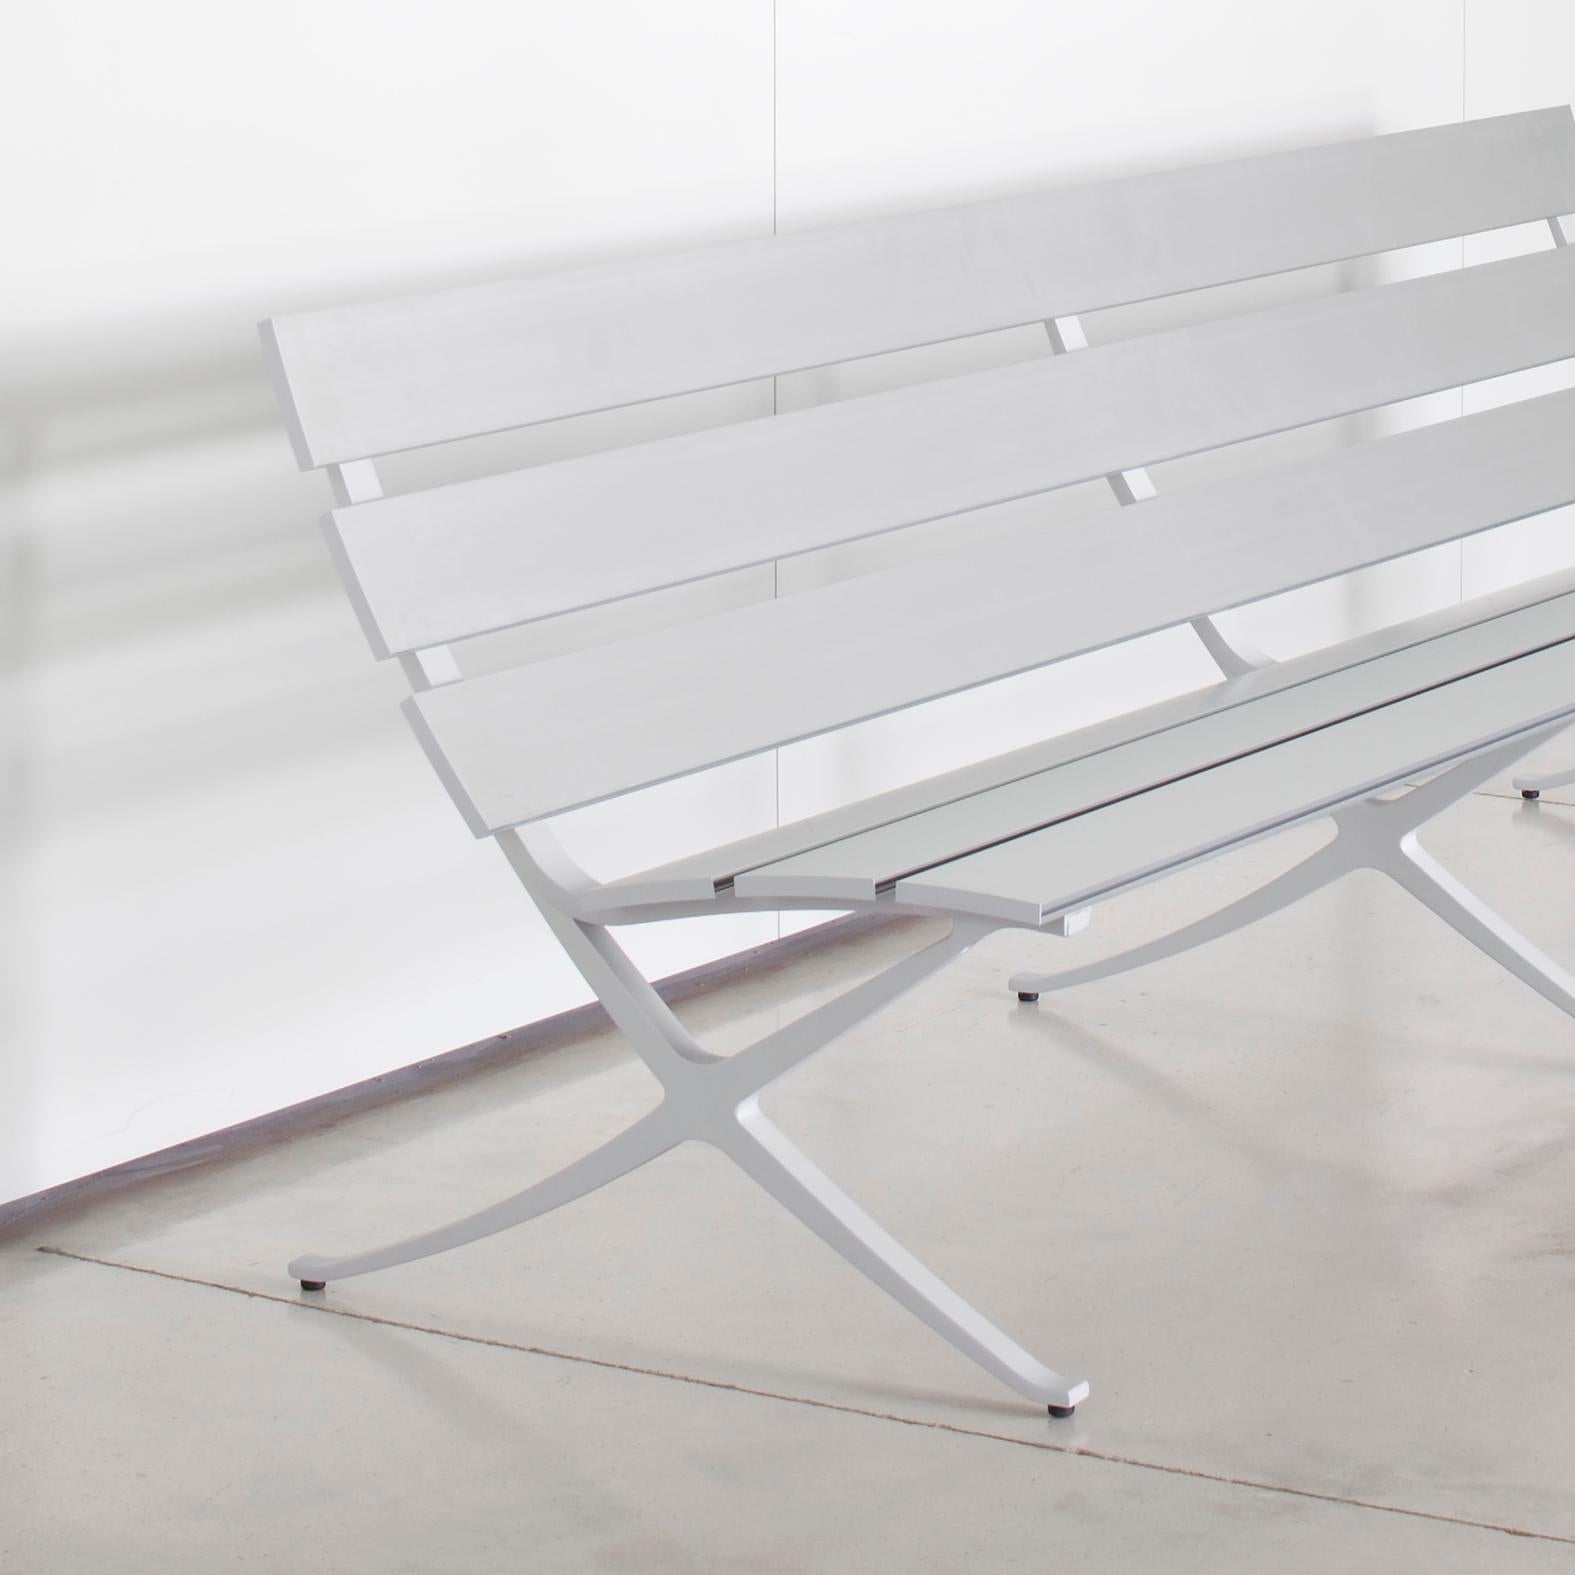 Bench B designed by Konstantin Grcic, 2012

The Bench B is a multifunctional bench for indoor and outdoor use, reaching up to 4.8 metres in length. A bench that is made up of solid extruded aluminium lineal slats and cast aluminium legs.

Silver